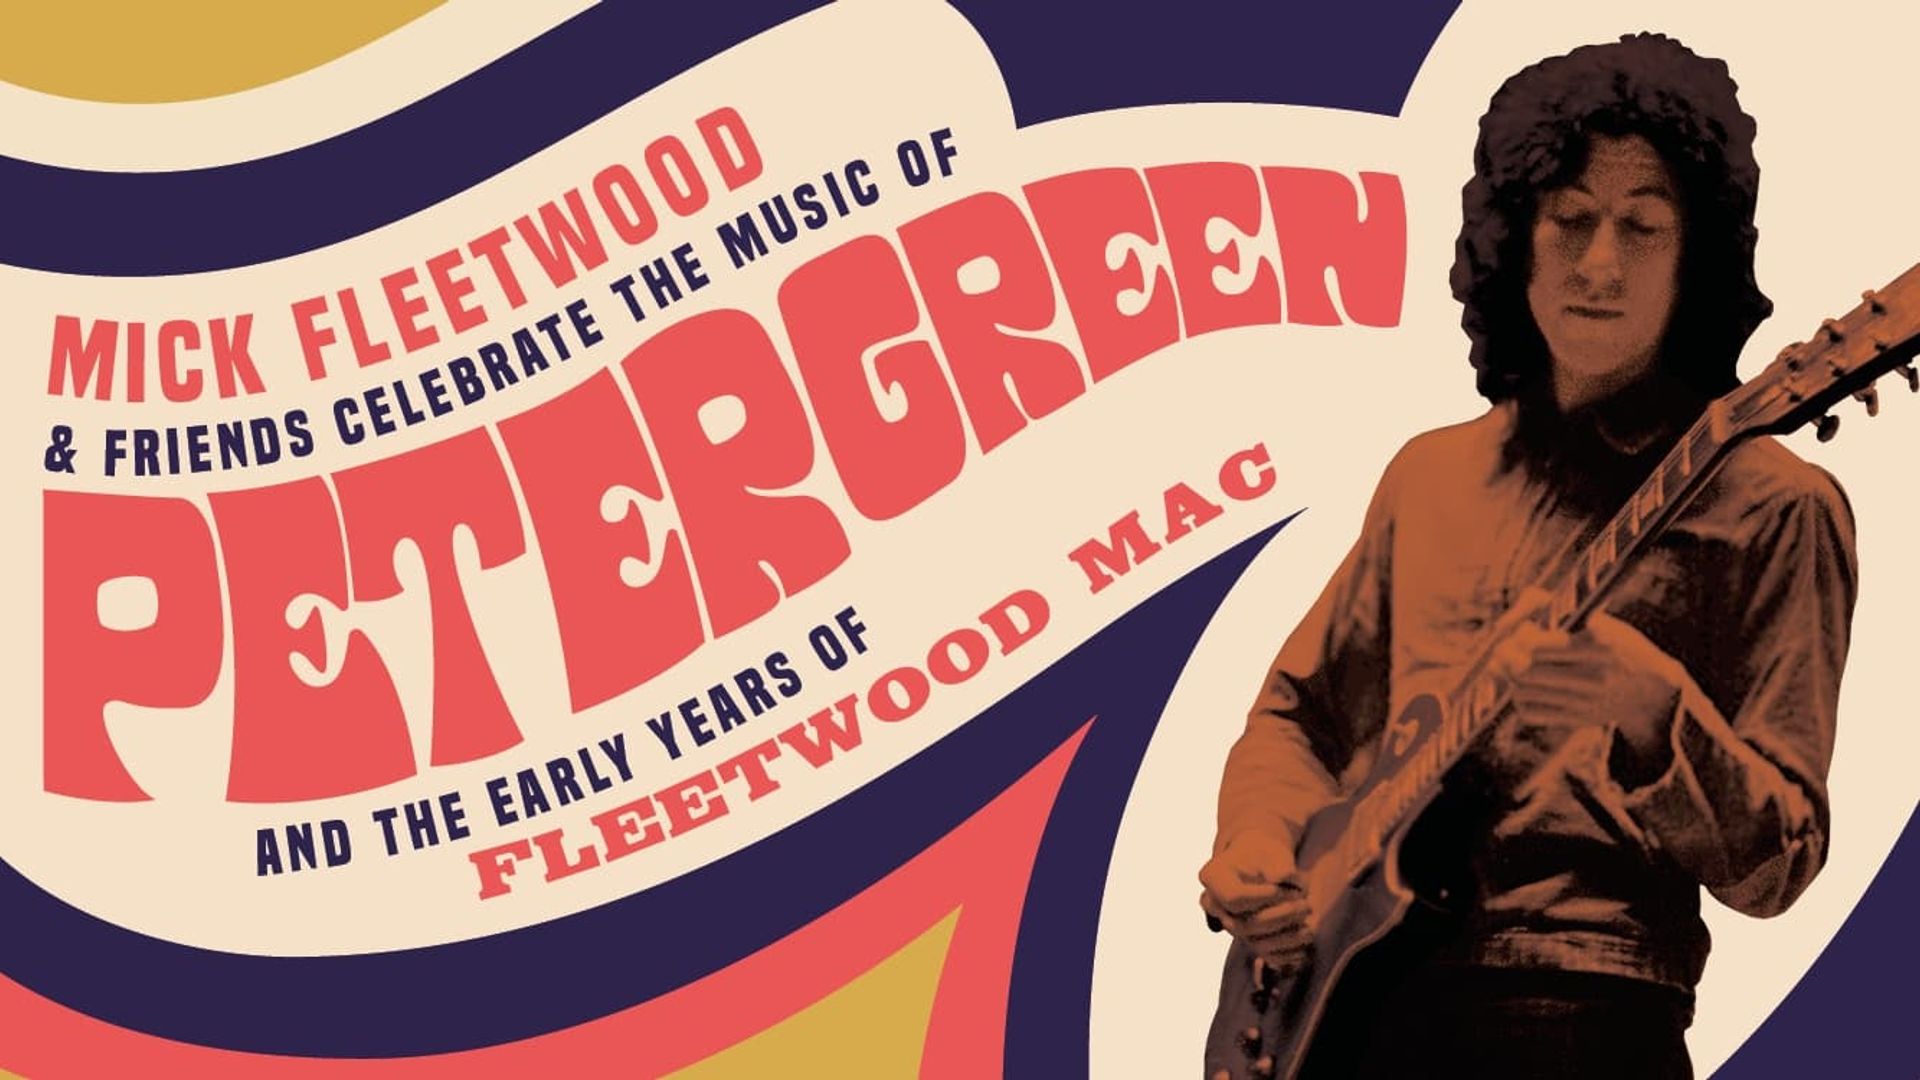 Mick Fleetwood & Friends Celebrate the Music of Peter Green background